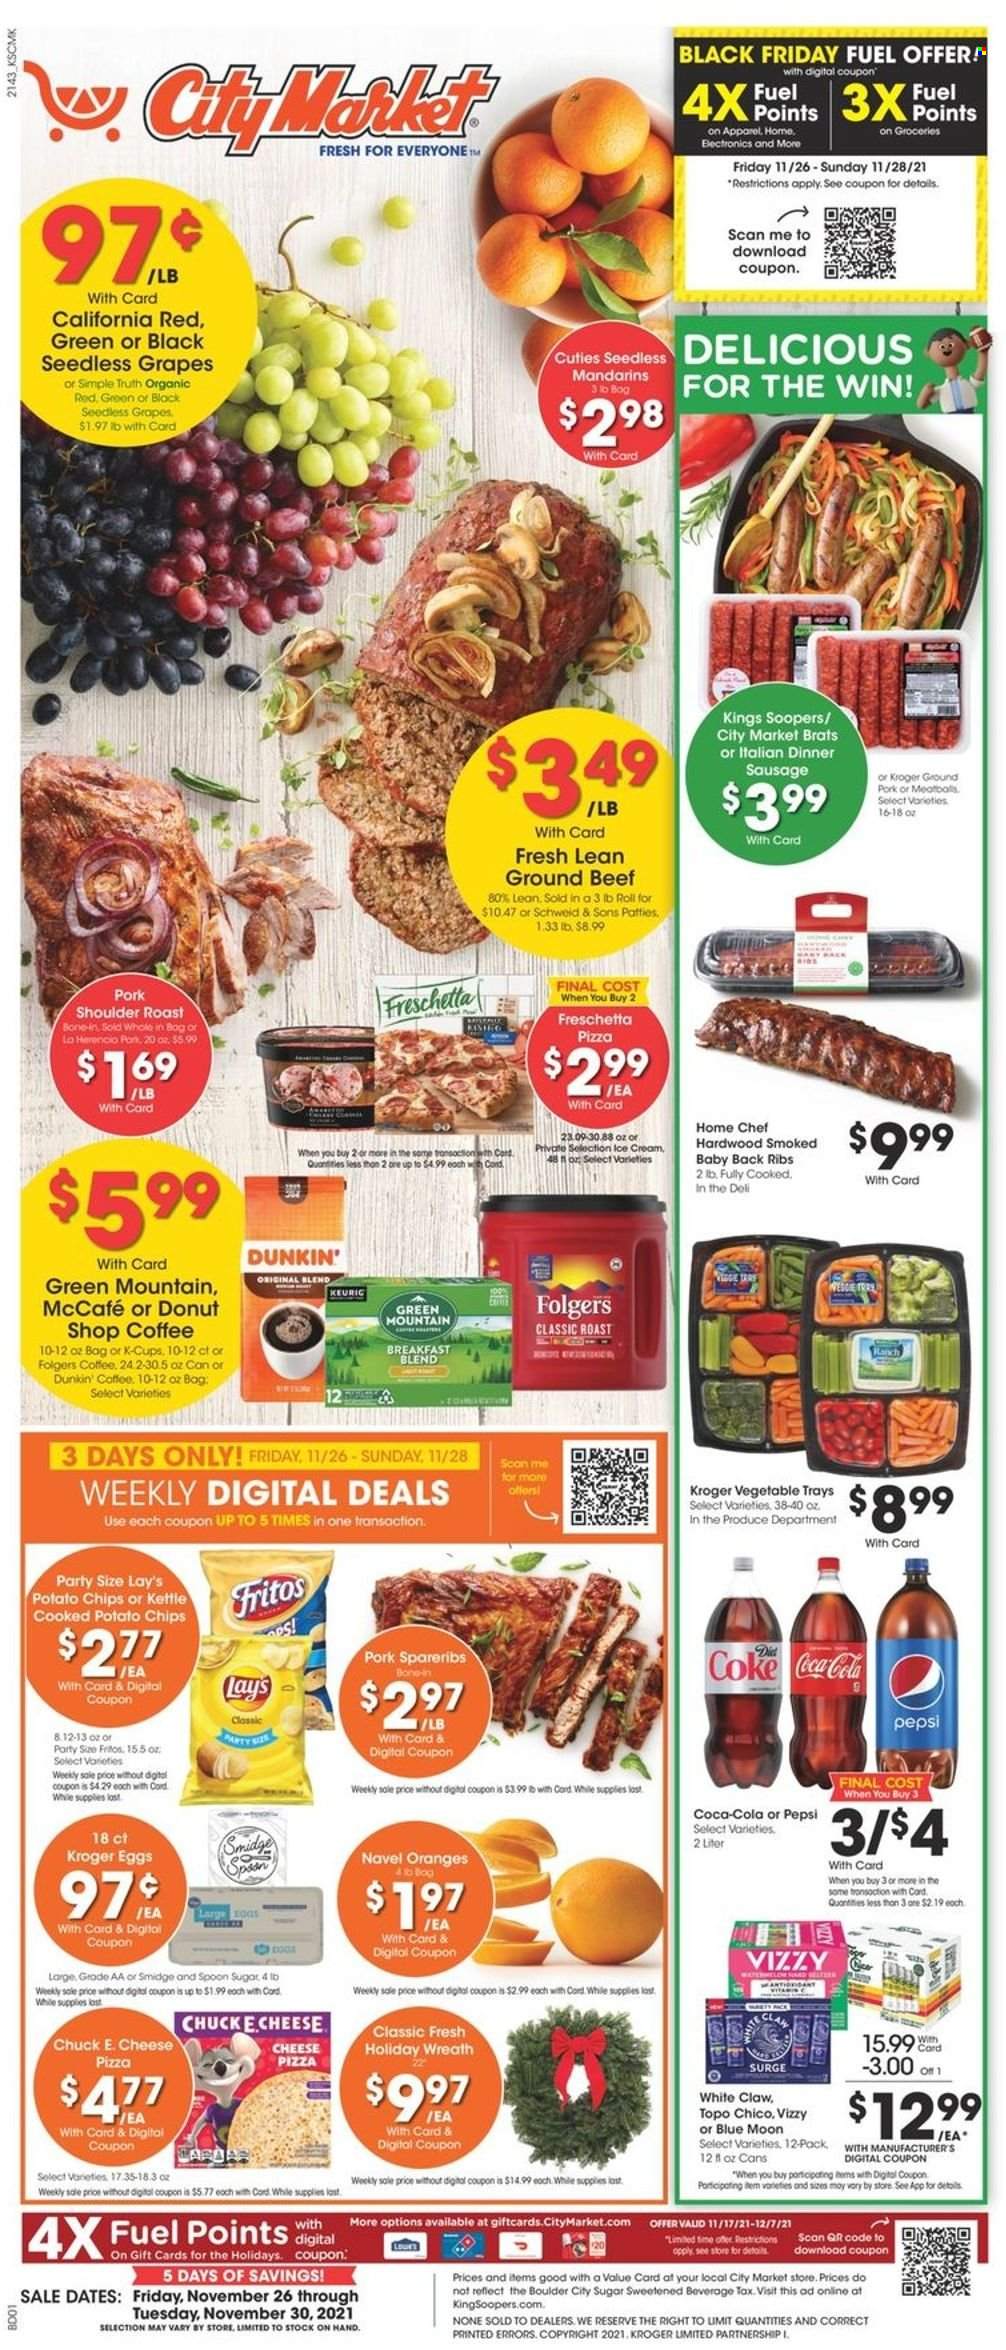 thumbnail - City Market Flyer - 11/26/2021 - 11/30/2021 - Sales products - seedless grapes, grapes, mandarines, oranges, pizza, sausage, eggs, ice cream, Fritos, potato chips, chips, Lay’s, sugar, Coca-Cola, Pepsi, coffee, Folgers, coffee capsules, McCafe, K-Cups, breakfast blend, Green Mountain, White Claw, beer, beef meat, ground beef, pork meat, pork ribs, pork roast, pork shoulder, pork spare ribs, pork back ribs, spoon, Blue Moon, navel oranges. Page 1.